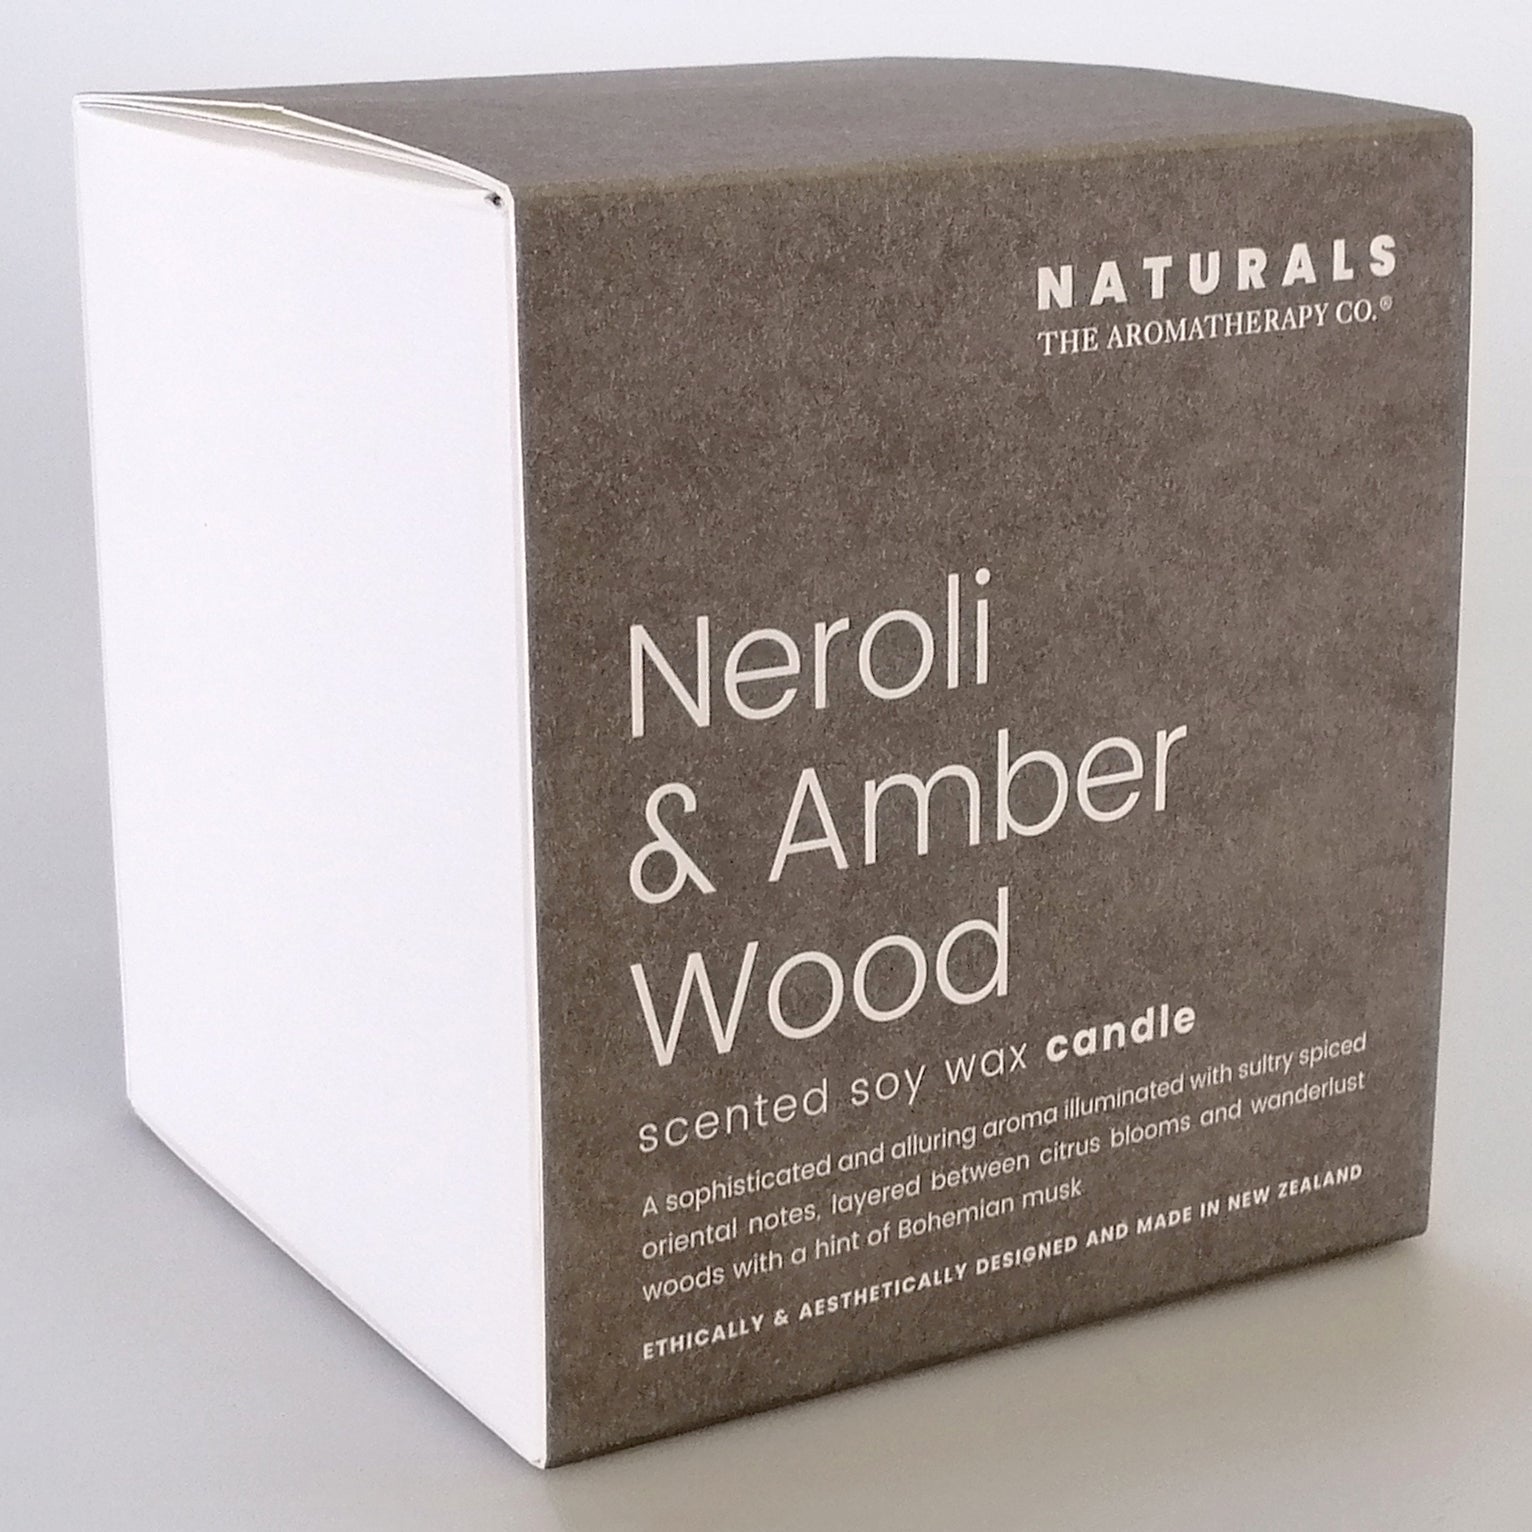 The Aromatherapy Co. Naturals - Neroli & Amber Wood Soy Wax Candle